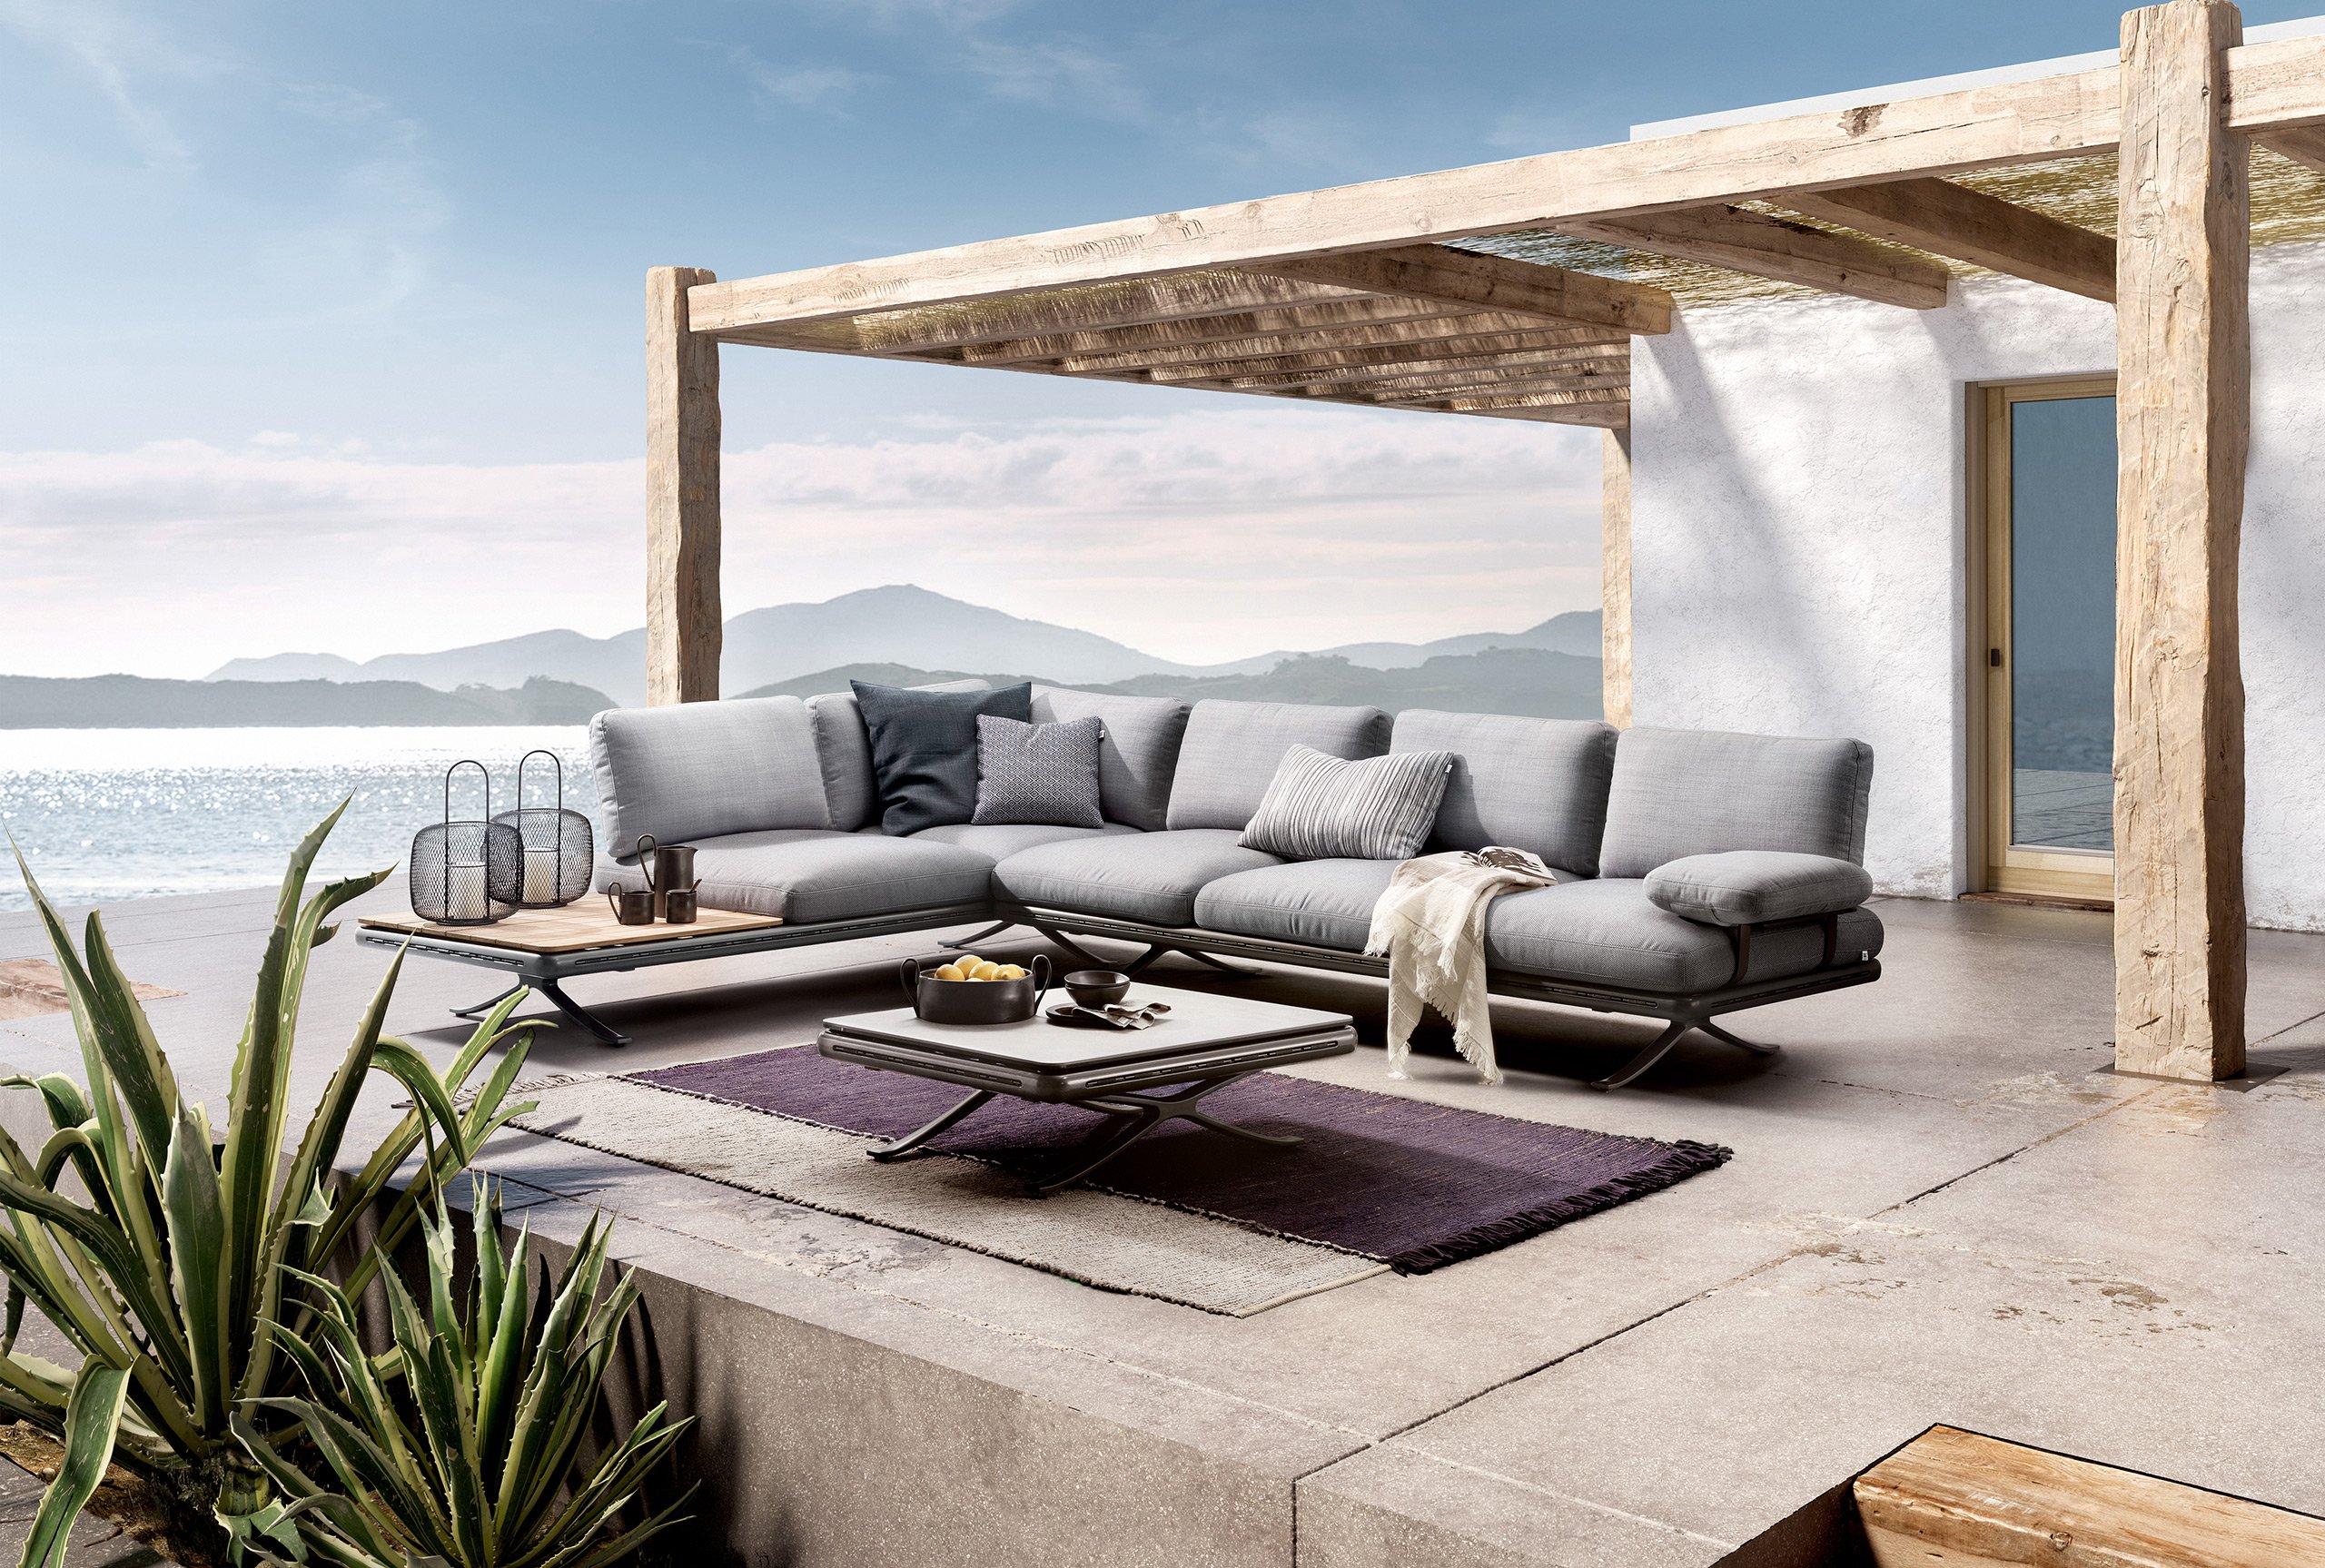 The new outdoor collection from Rolf Benz: Rolf Benz YOKO. At home – outside.